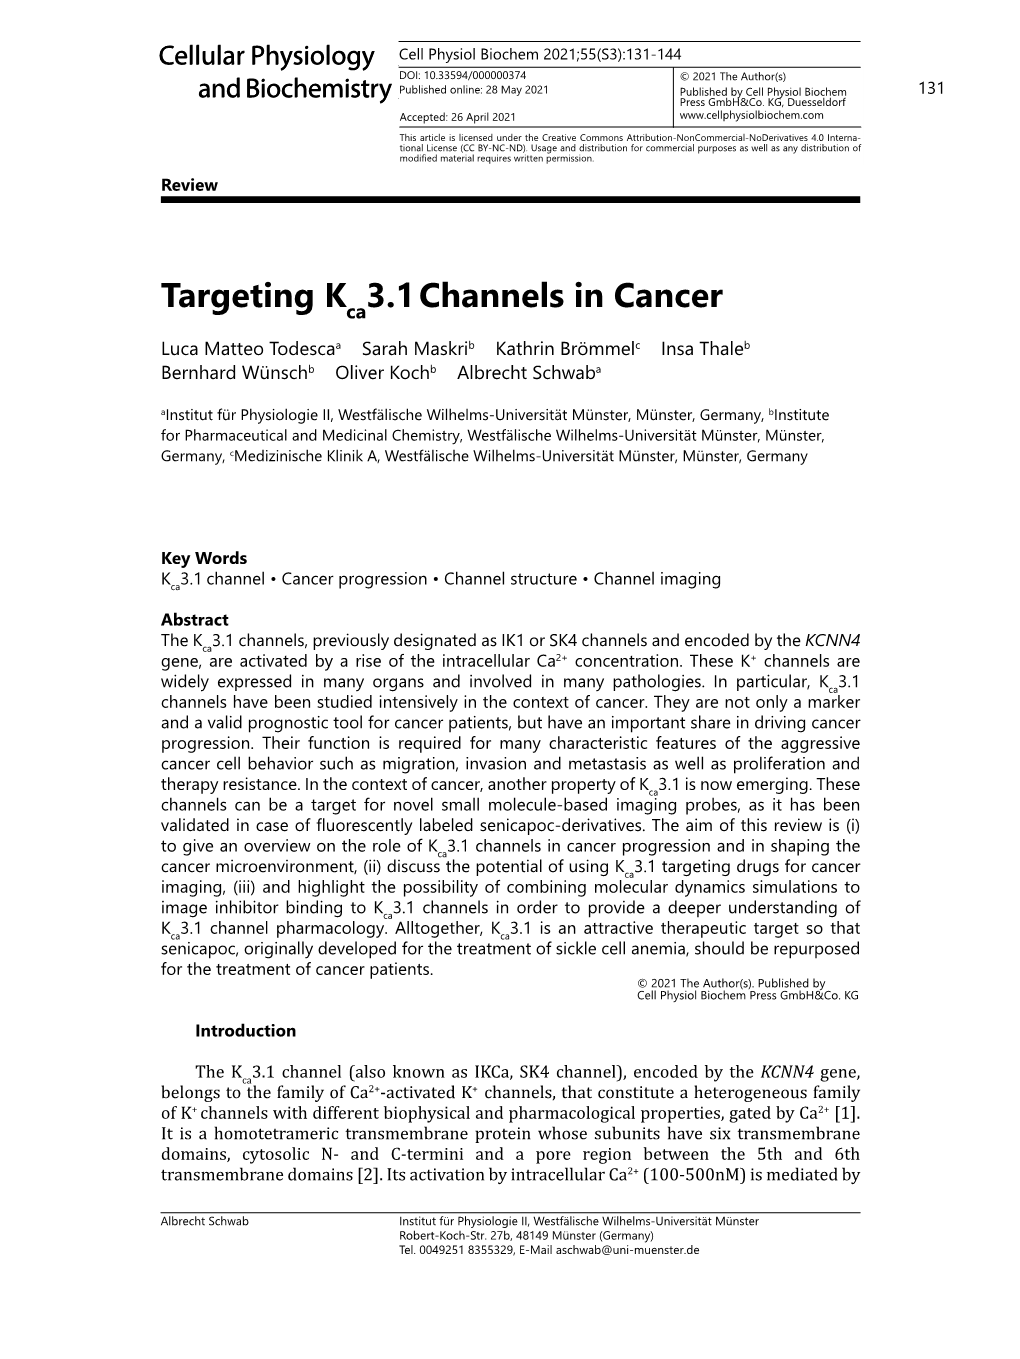 Targeting K 3.1Channels in Cancer